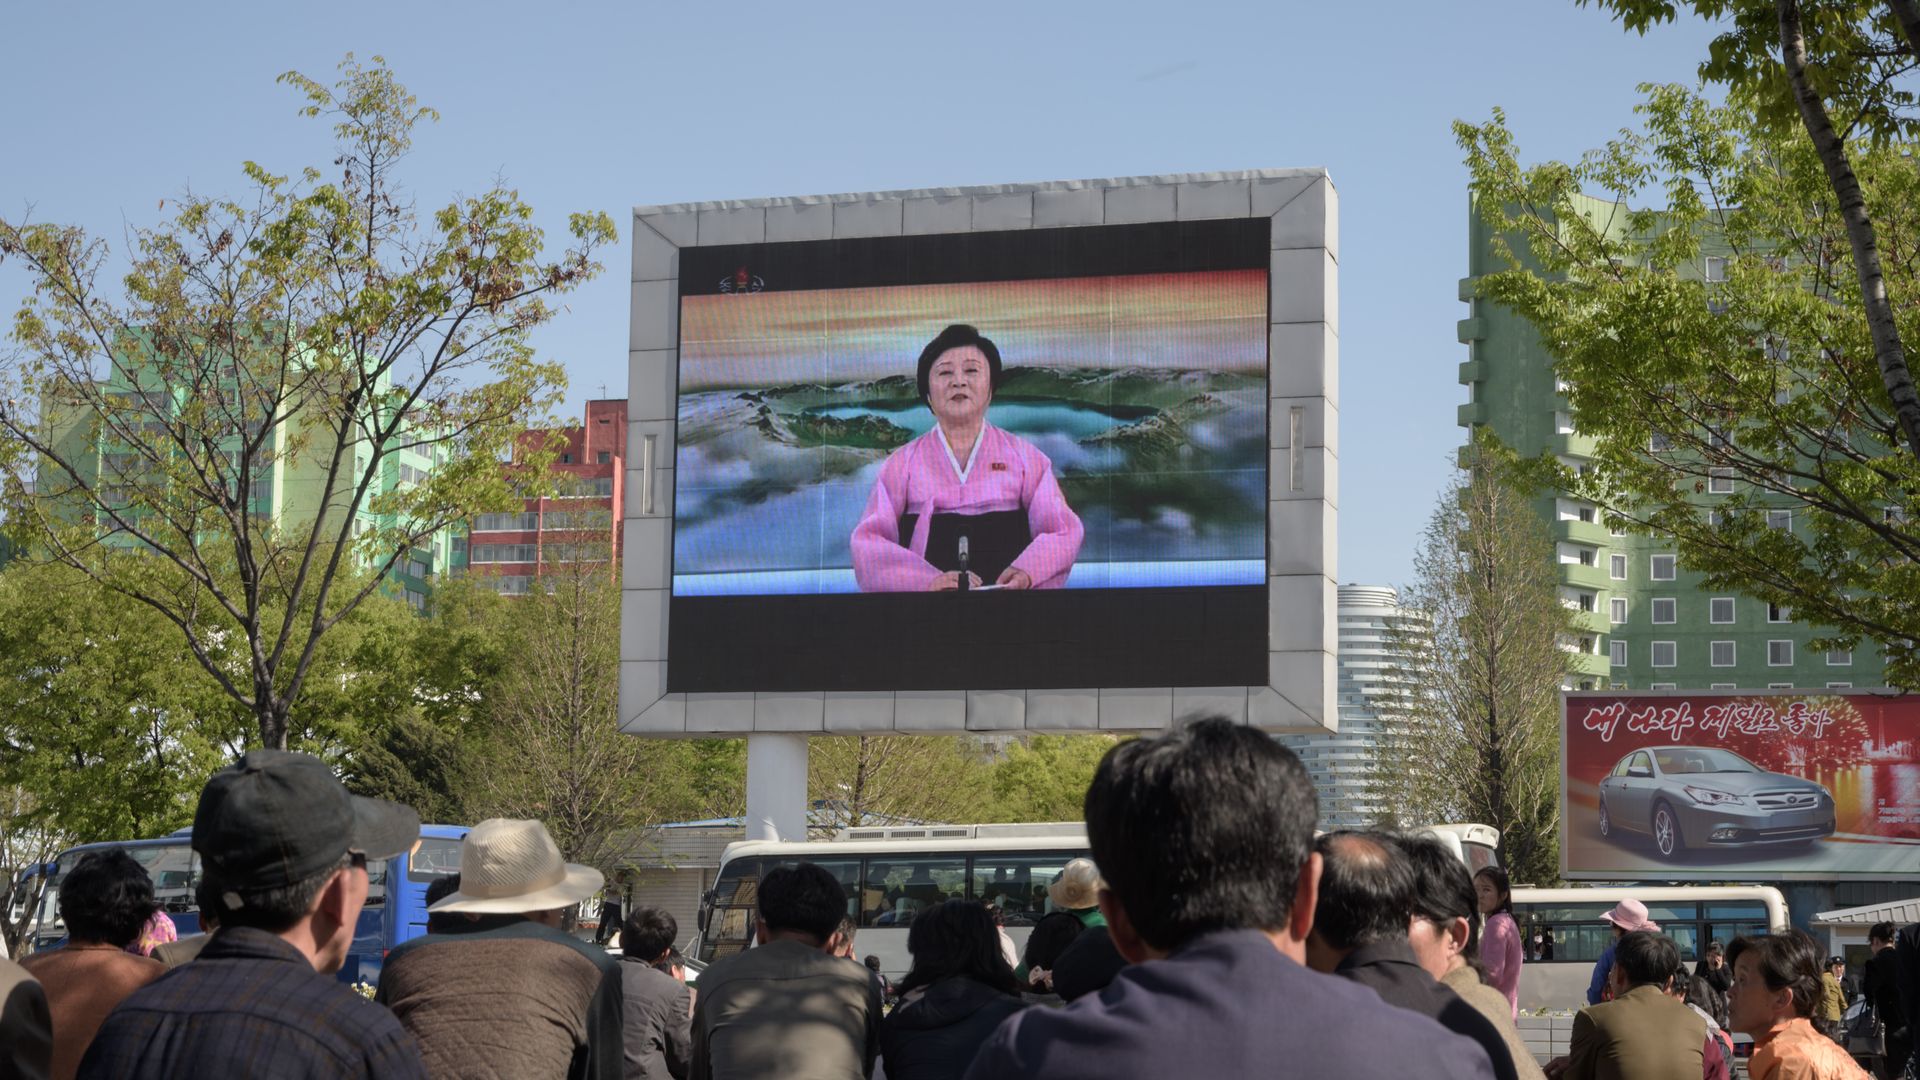 People watch a public television screen showing coverage of the 'Third Plenary Meeting' of the 7th central committee of the ruling Workers' Party, in Pyongyang 